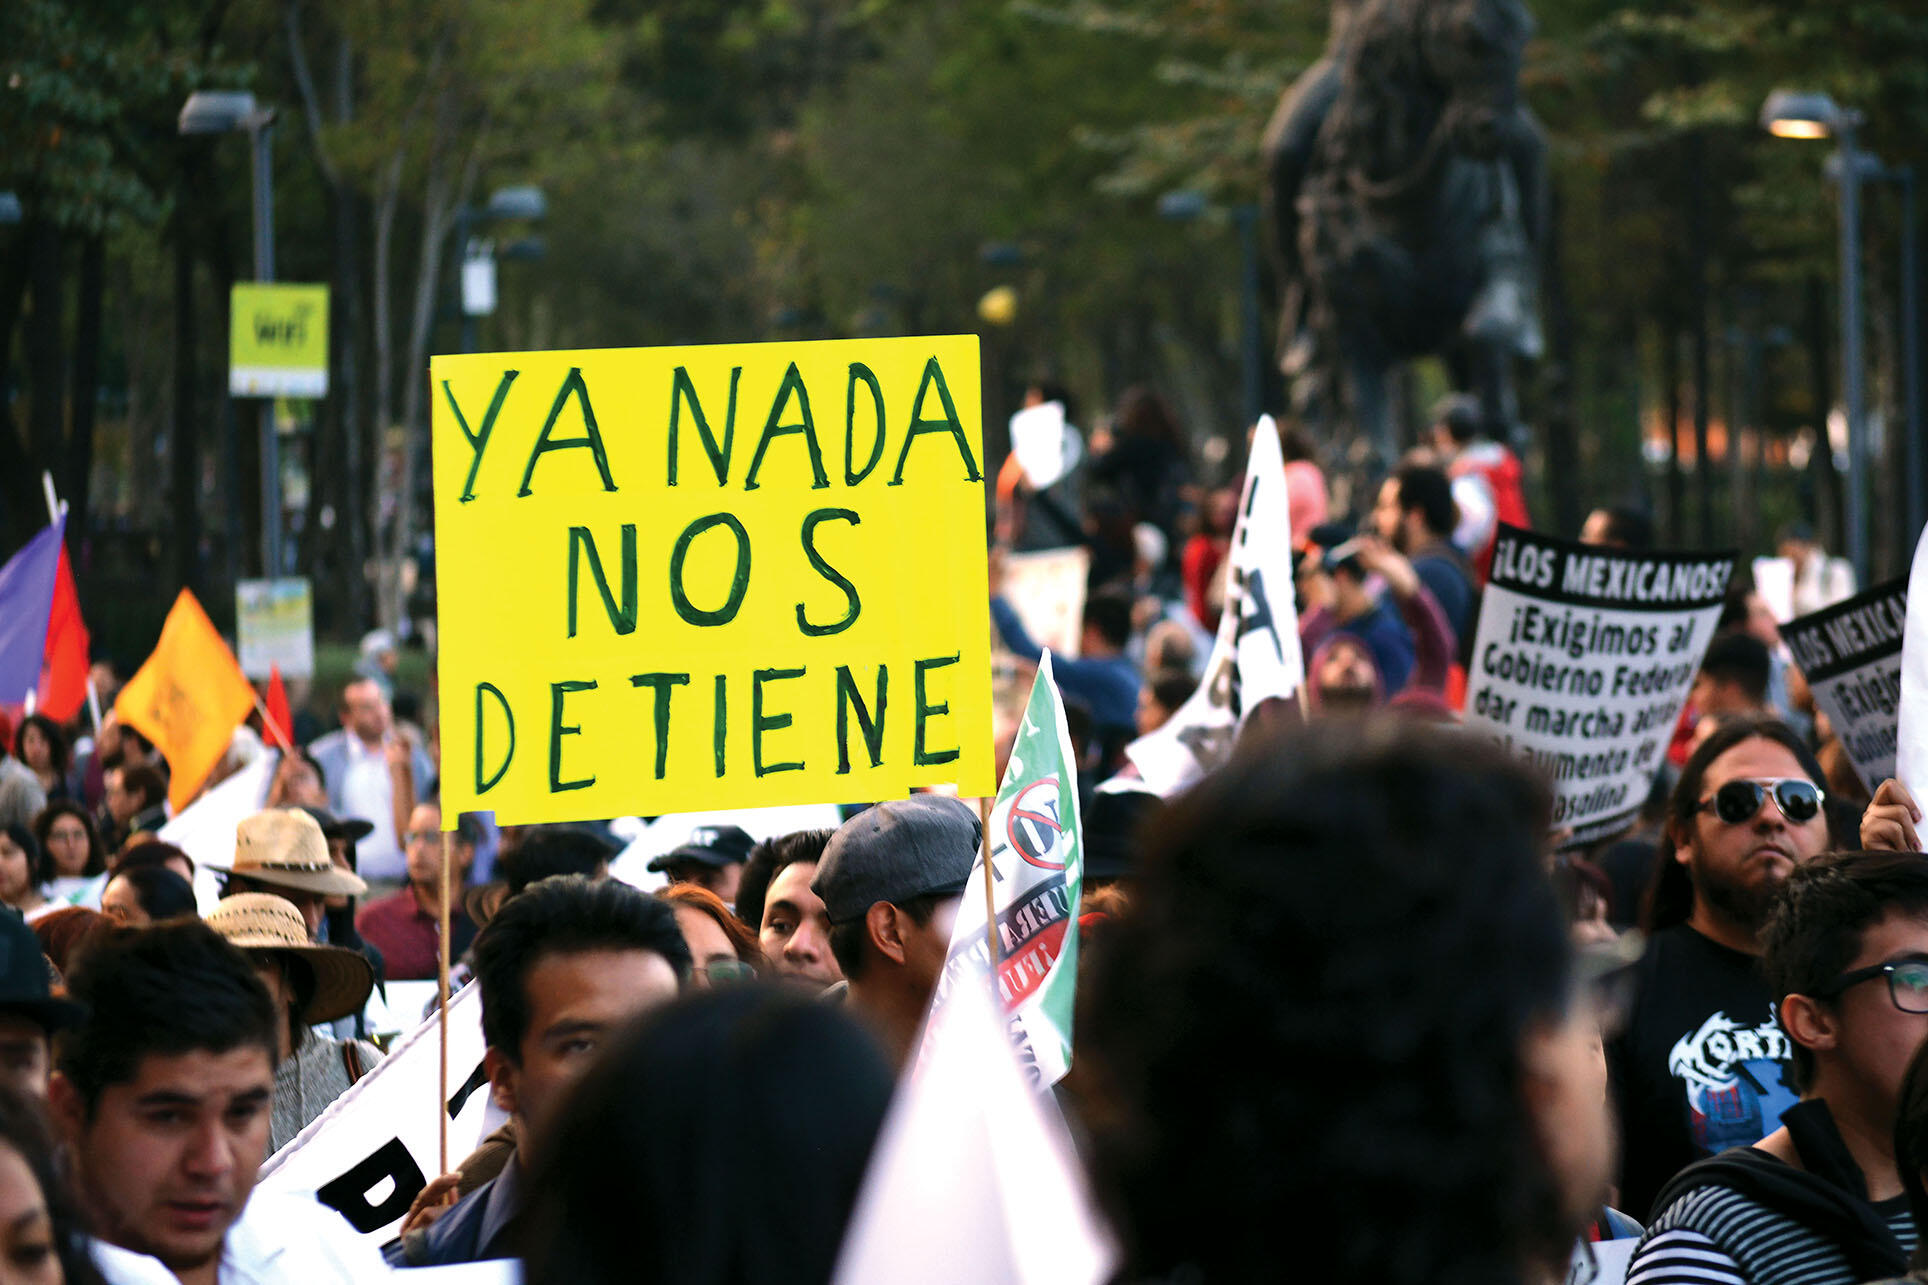 A sign reading "Ya nada nos de tiene" - We have nothing more - protests against the gasoline price hikes of the gasolinazo in Mexico, January 2017. (Photo by ProtoplasmaKid.)